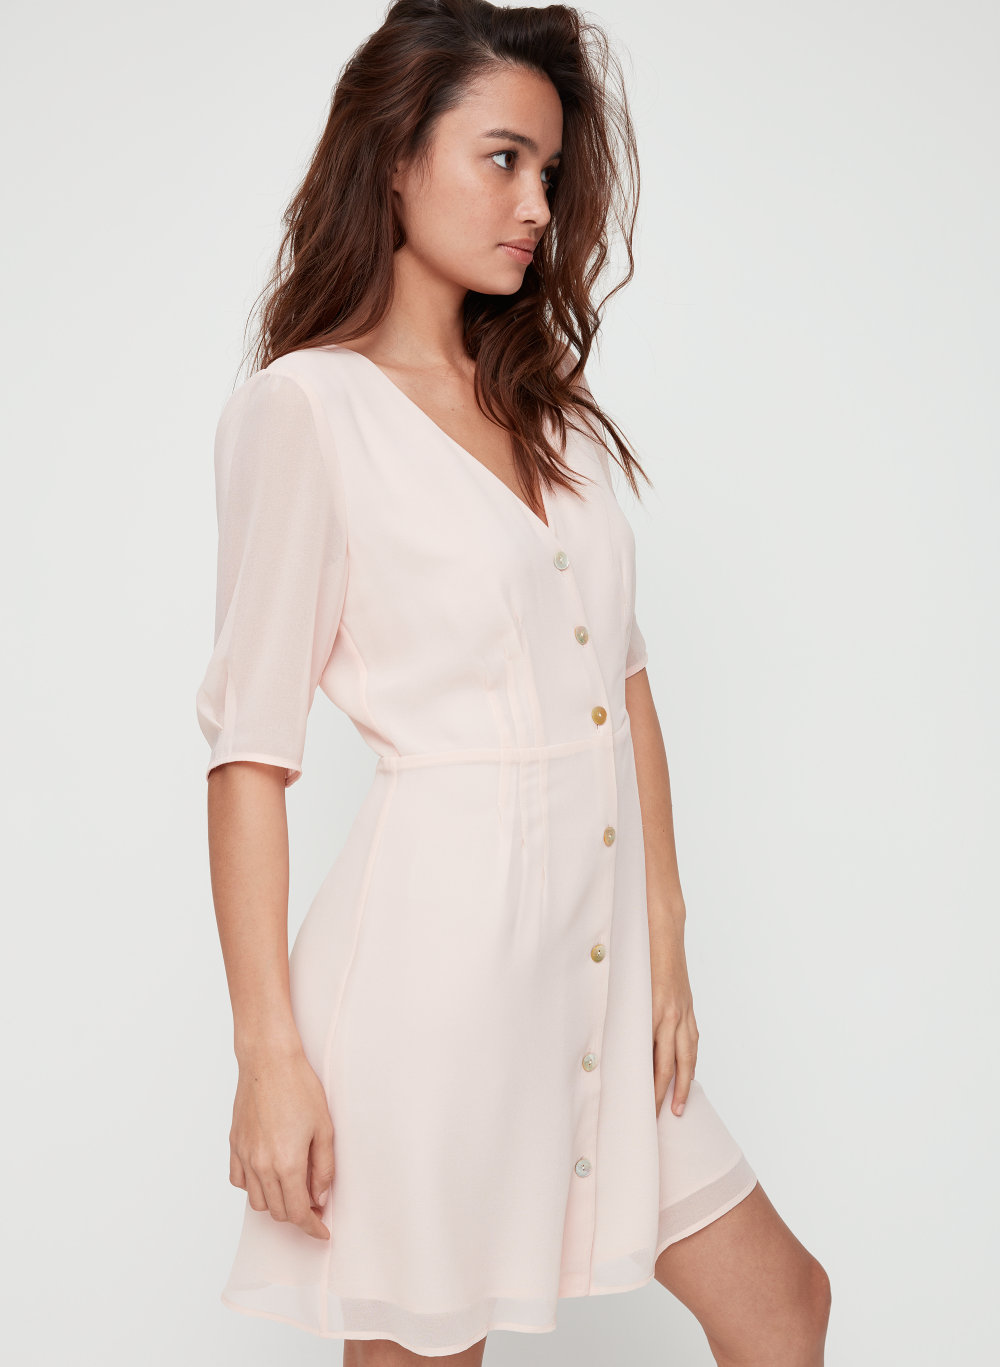 button front dress with sleeves